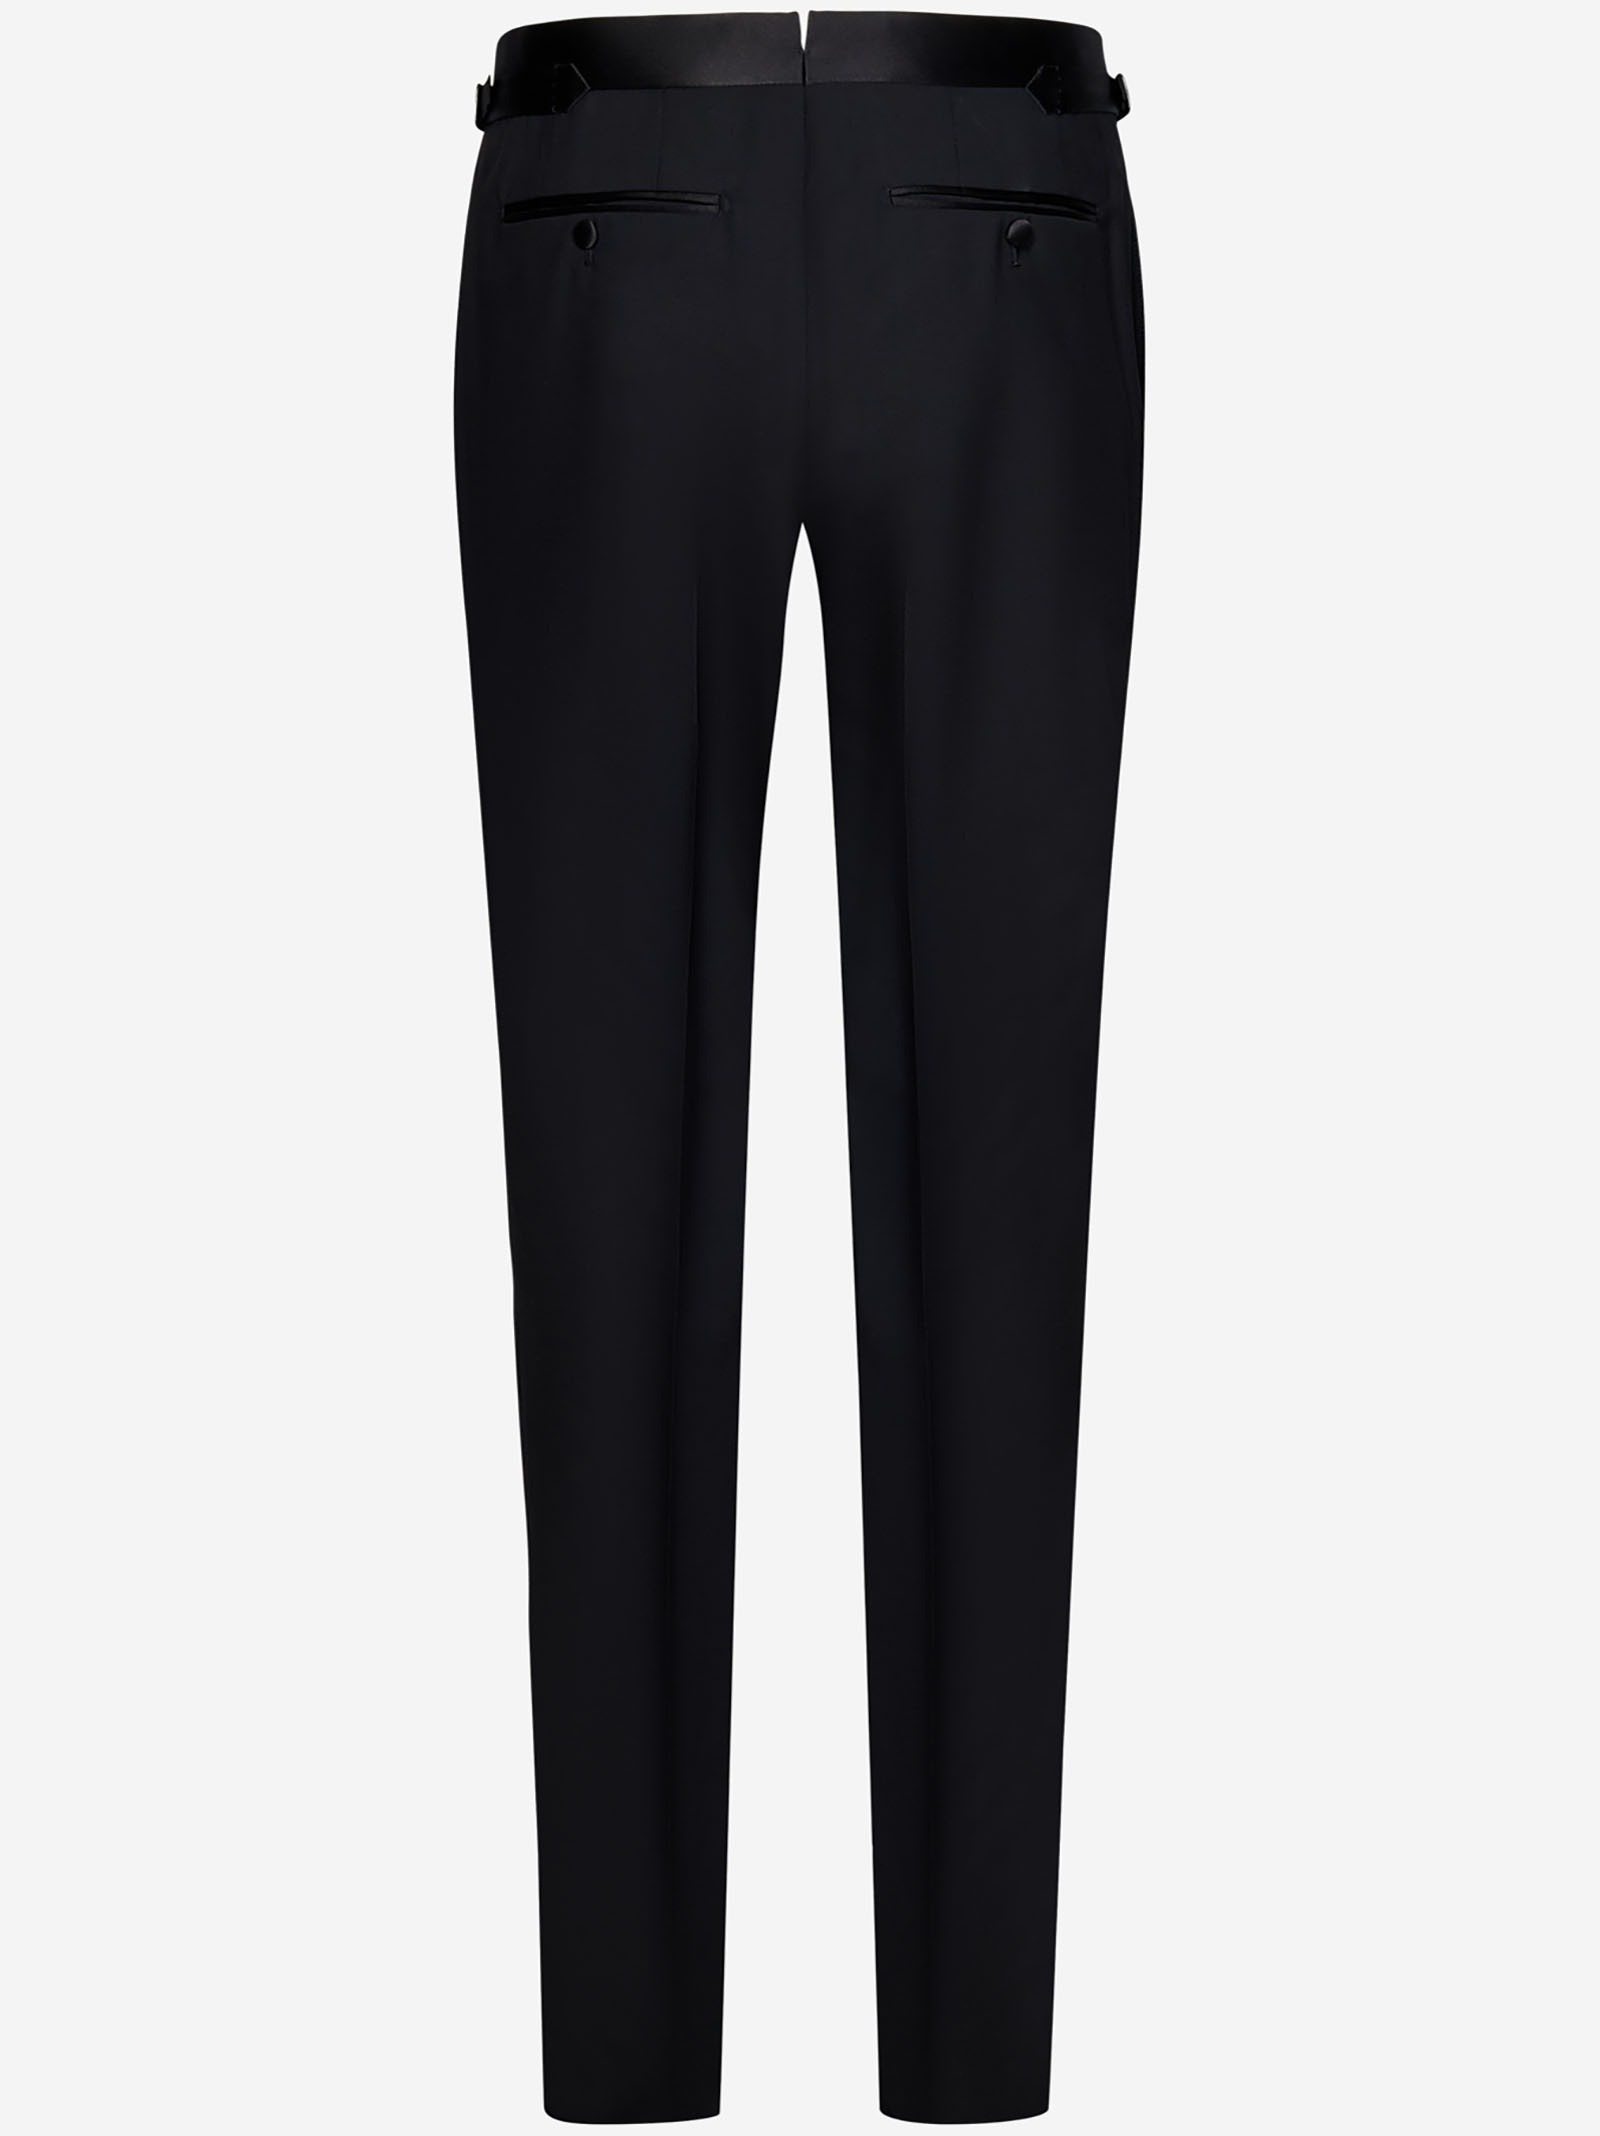 Black wool and silk satin 'Shelton' suit with single-breasted blazer and tailored trousers. - 5